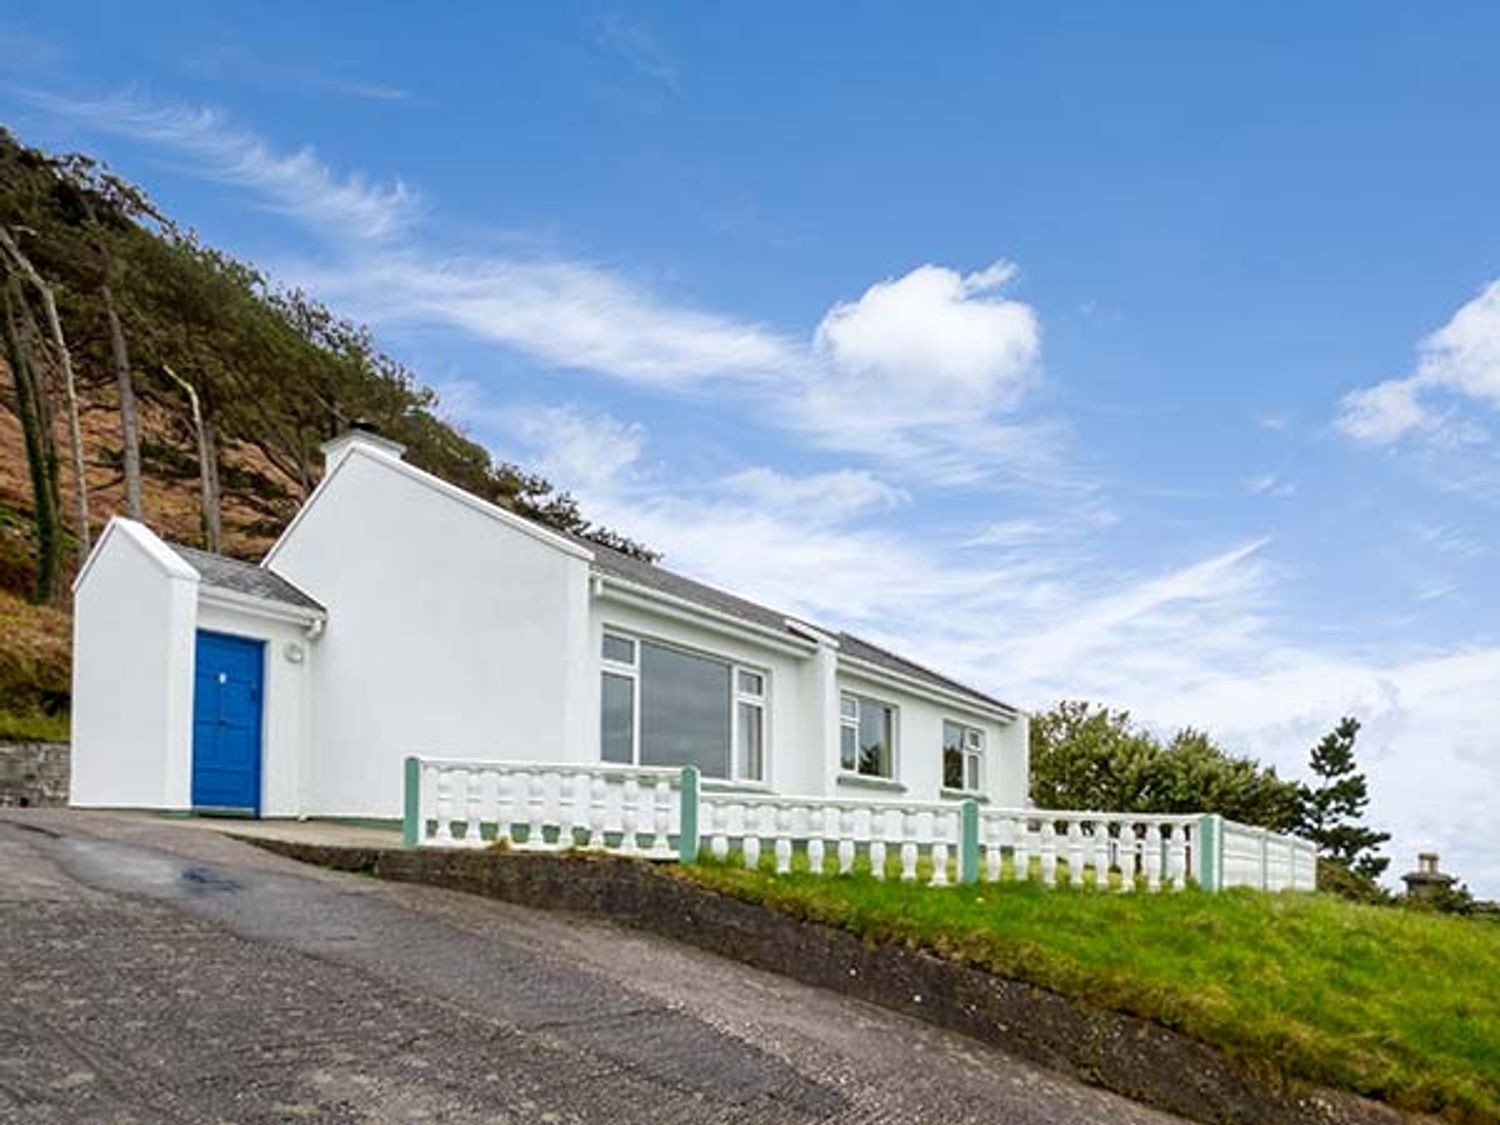 Rossbeigh Beach Cottage No 6 - County Kerry - 950536 - photo 1